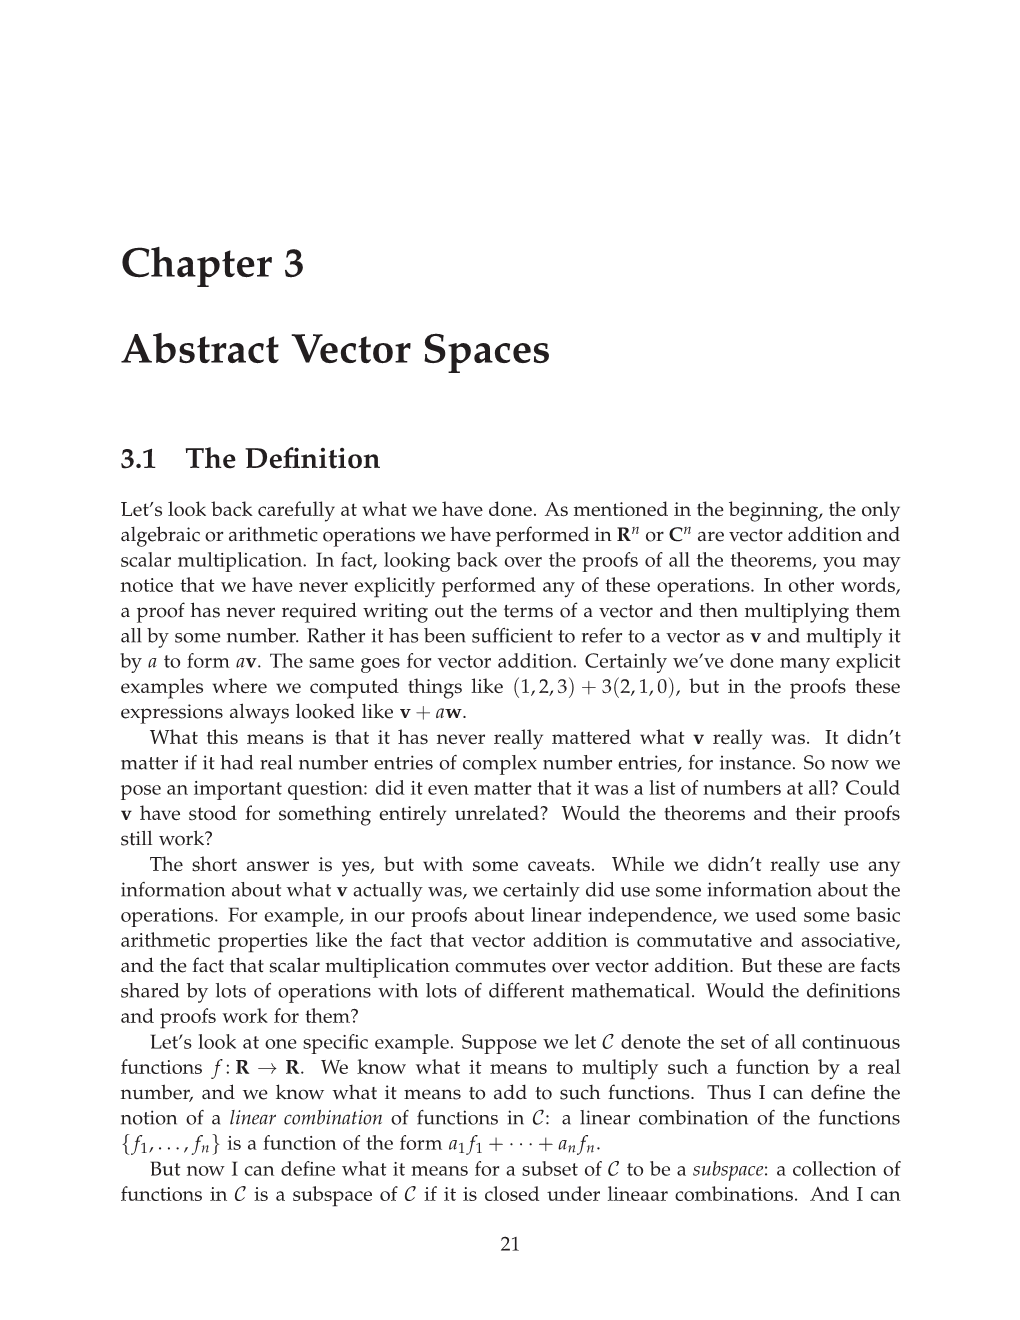 Chapter 3 Abstract Vector Spaces